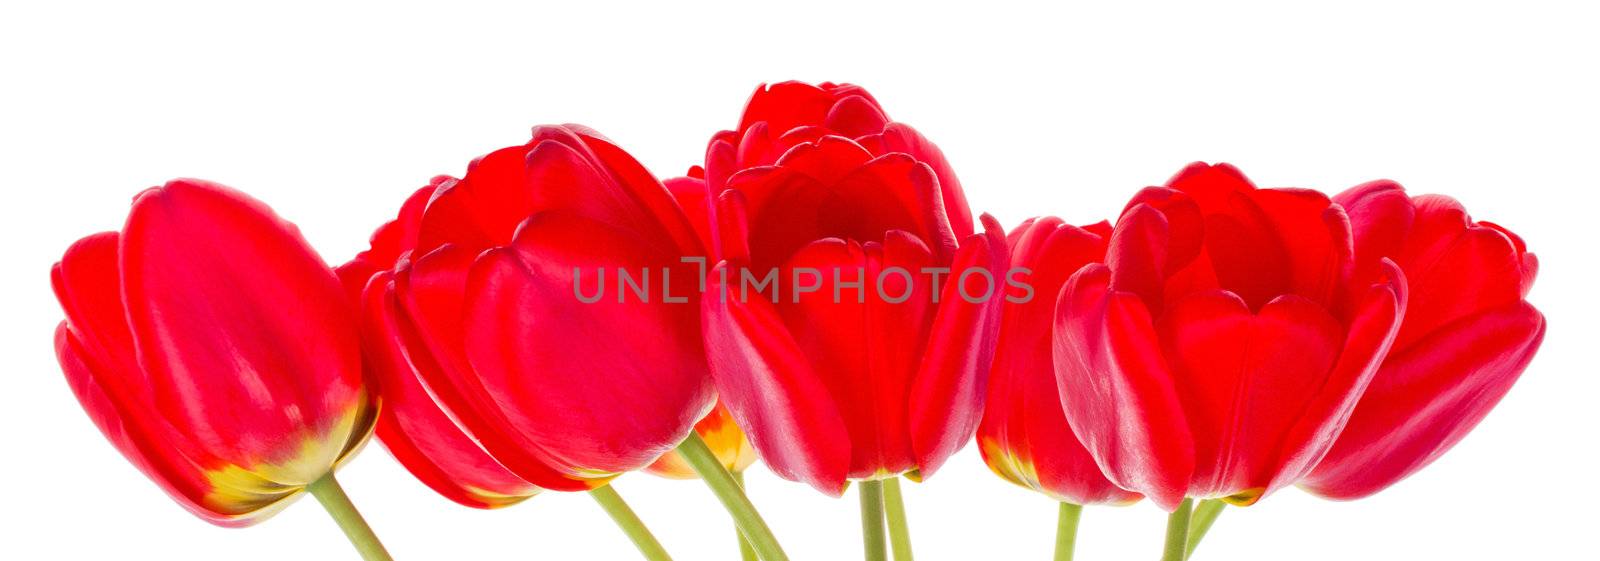 red tulips by Alekcey